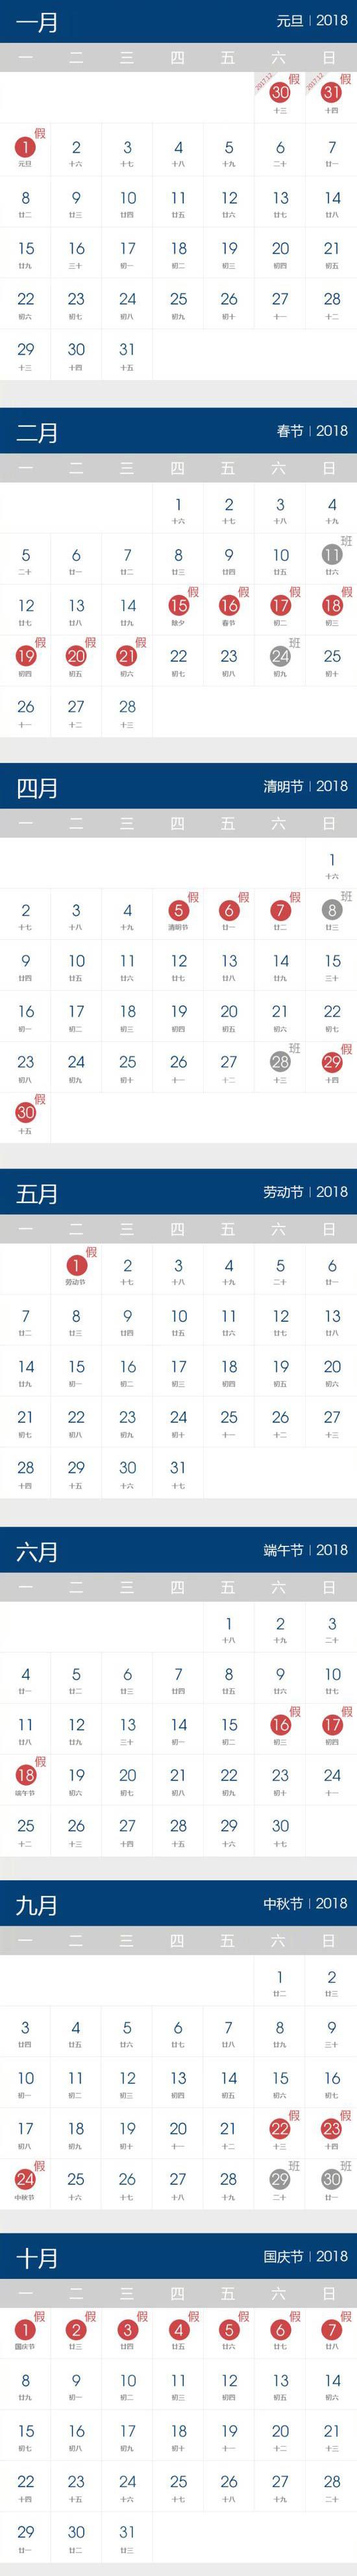 Months from top to bottom: January, February, April, May, June, September, and October (Sina)